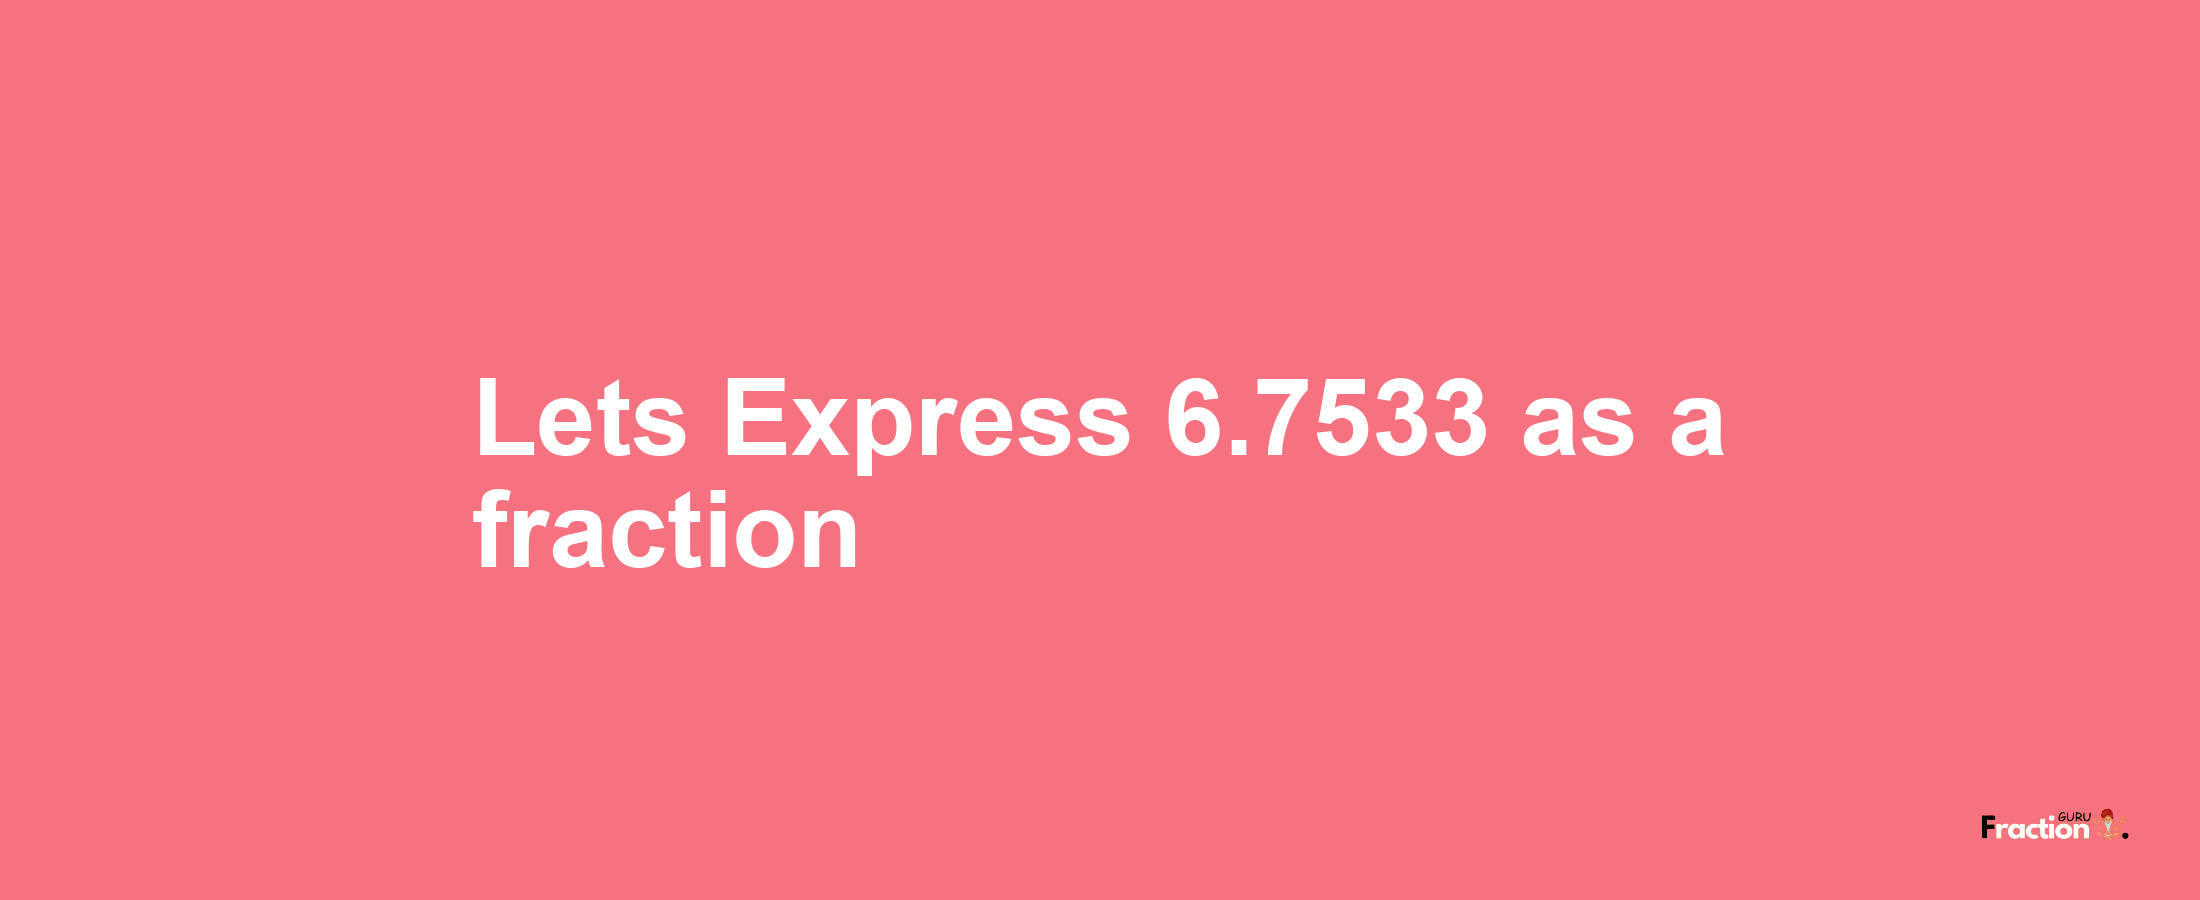 Lets Express 6.7533 as afraction